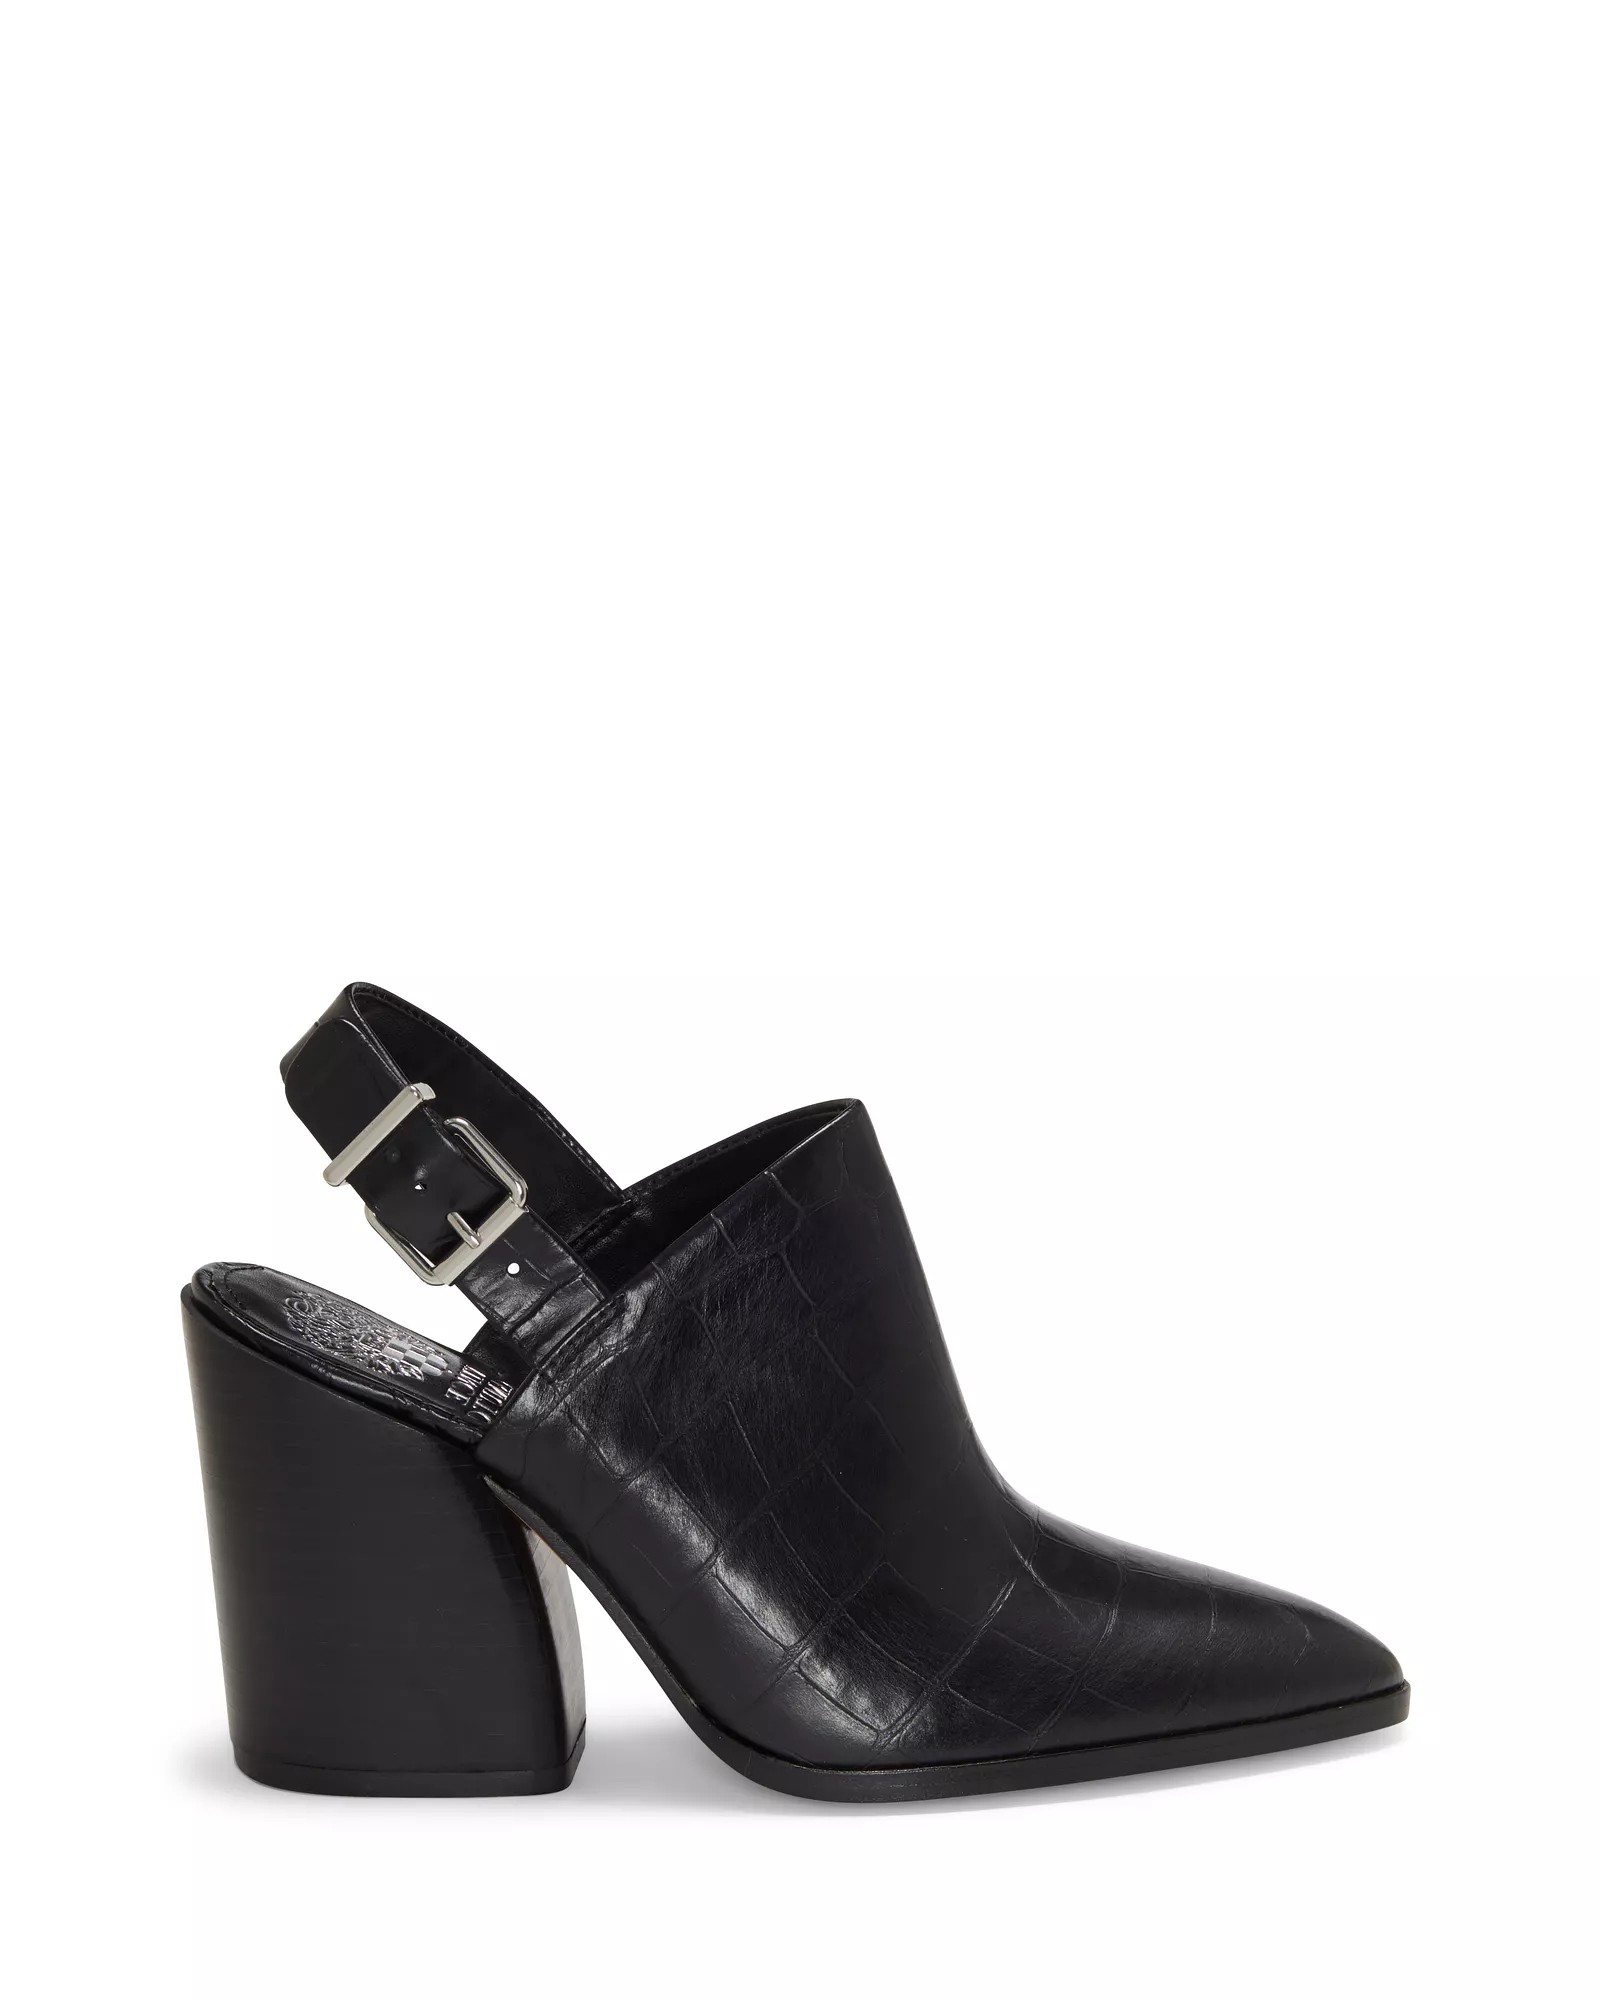 Vince Camuto Chemine Slingback Bootie | Vince Camuto